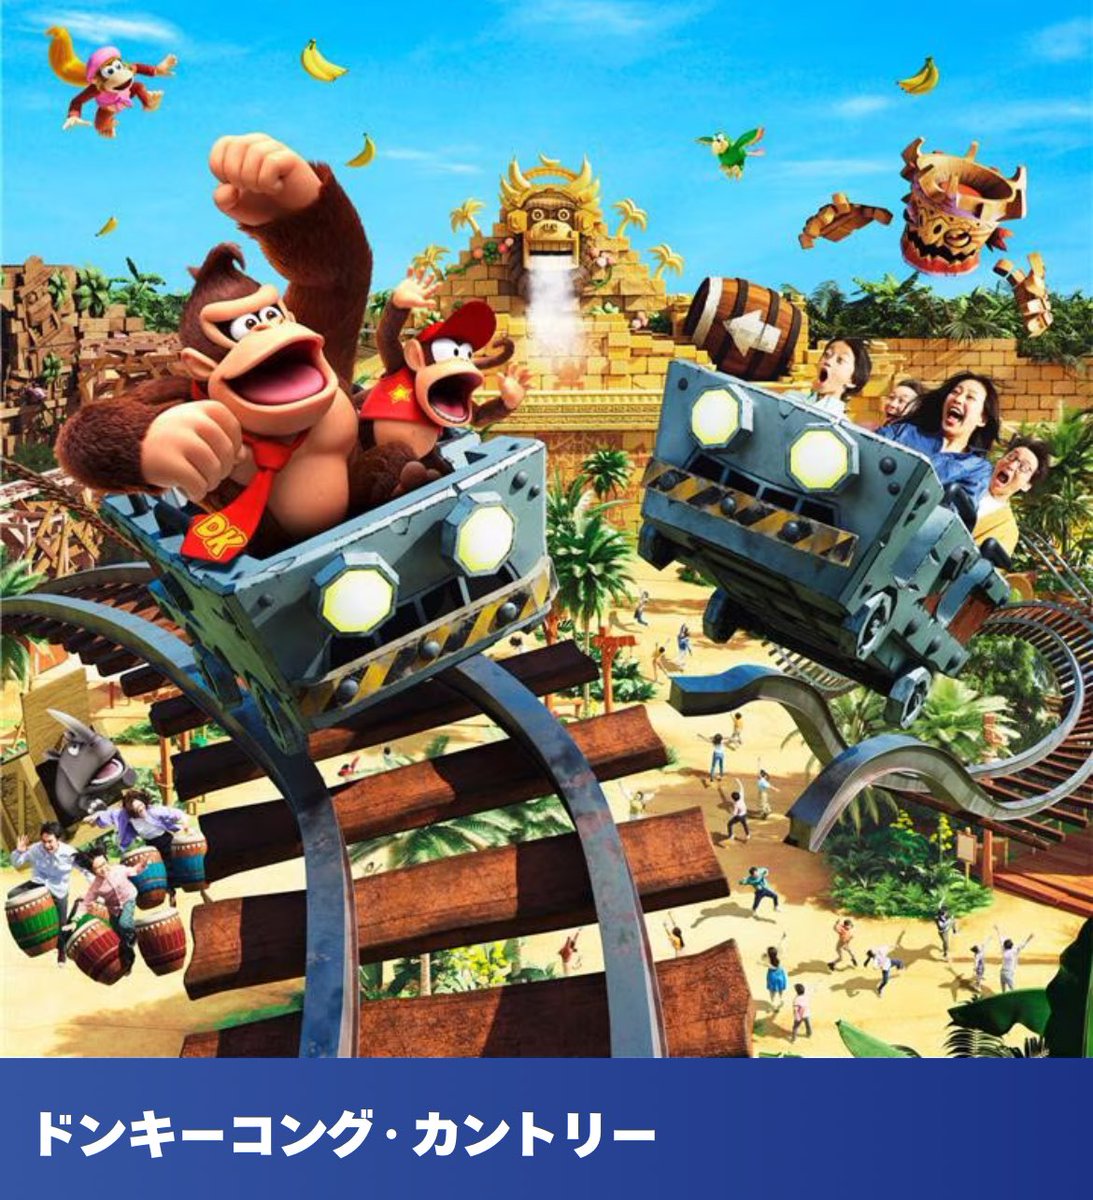 Universal Studios Japan has delayed the Donkey Kong Country area opening from this spring until the 2nd half of 2025 🙈 🍌 #USJ